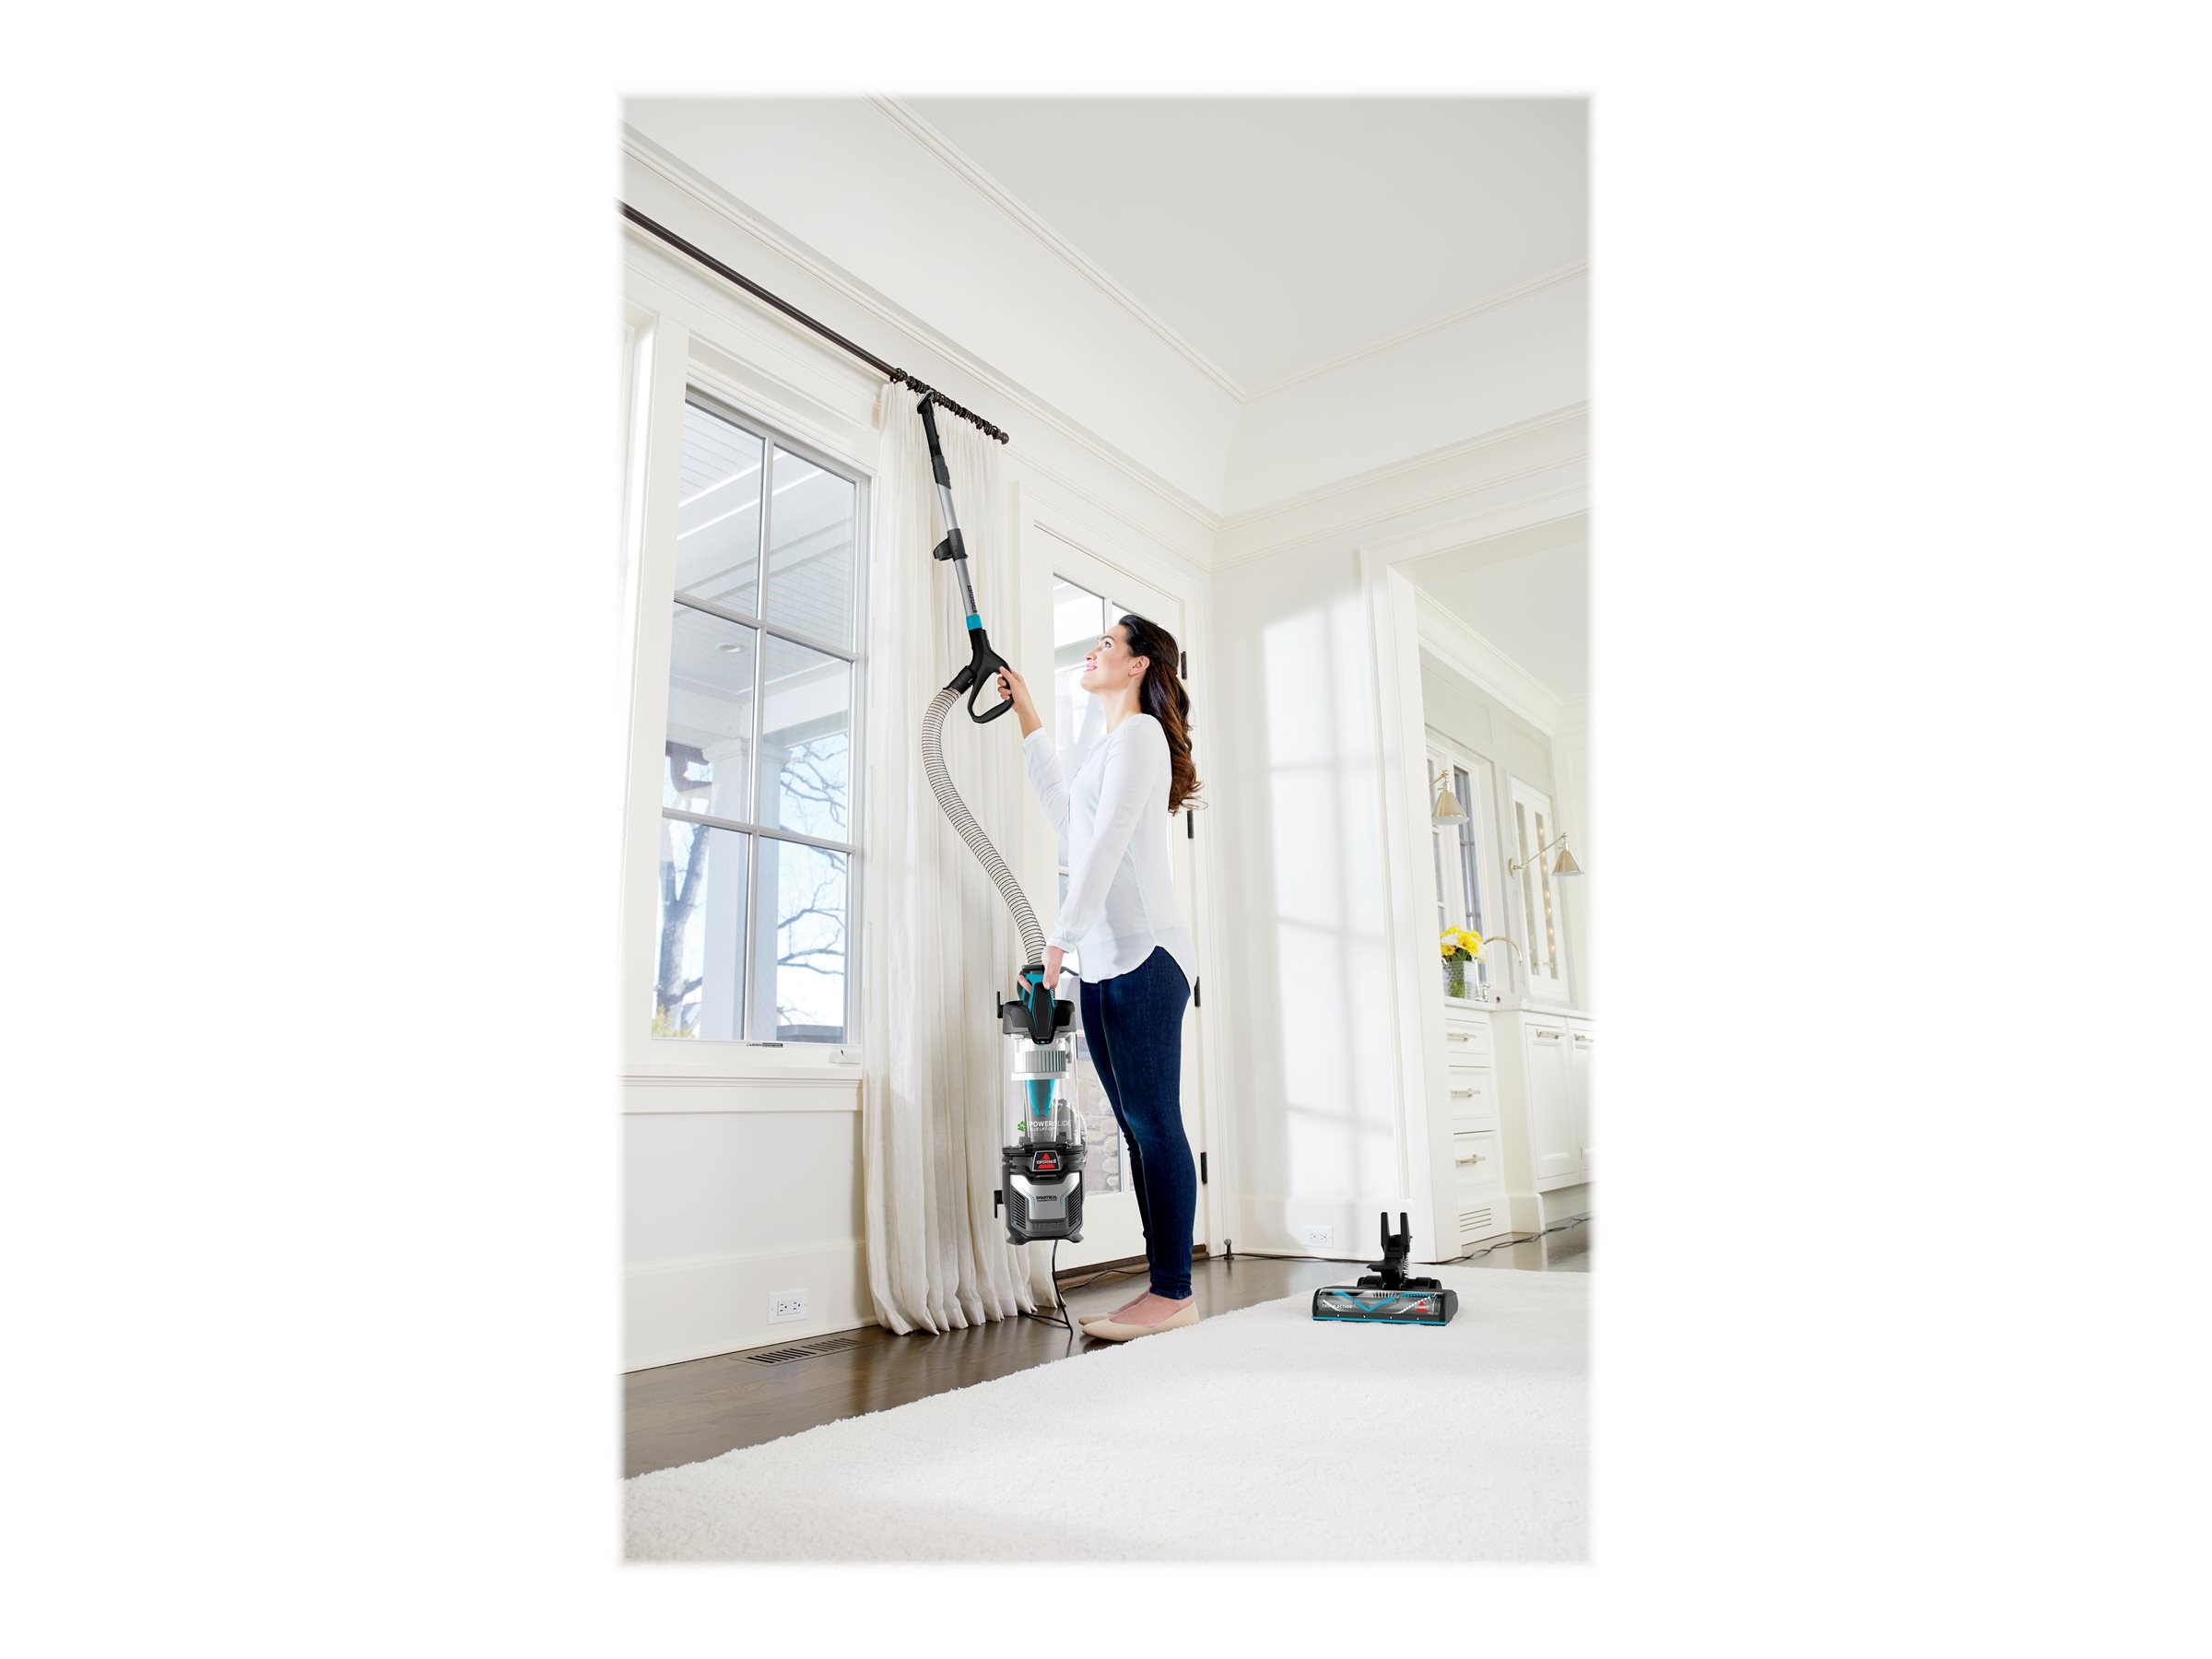 BISSELL PowerGlide Lift-Off Pet Plus Vacuum Cleaner - 2920C